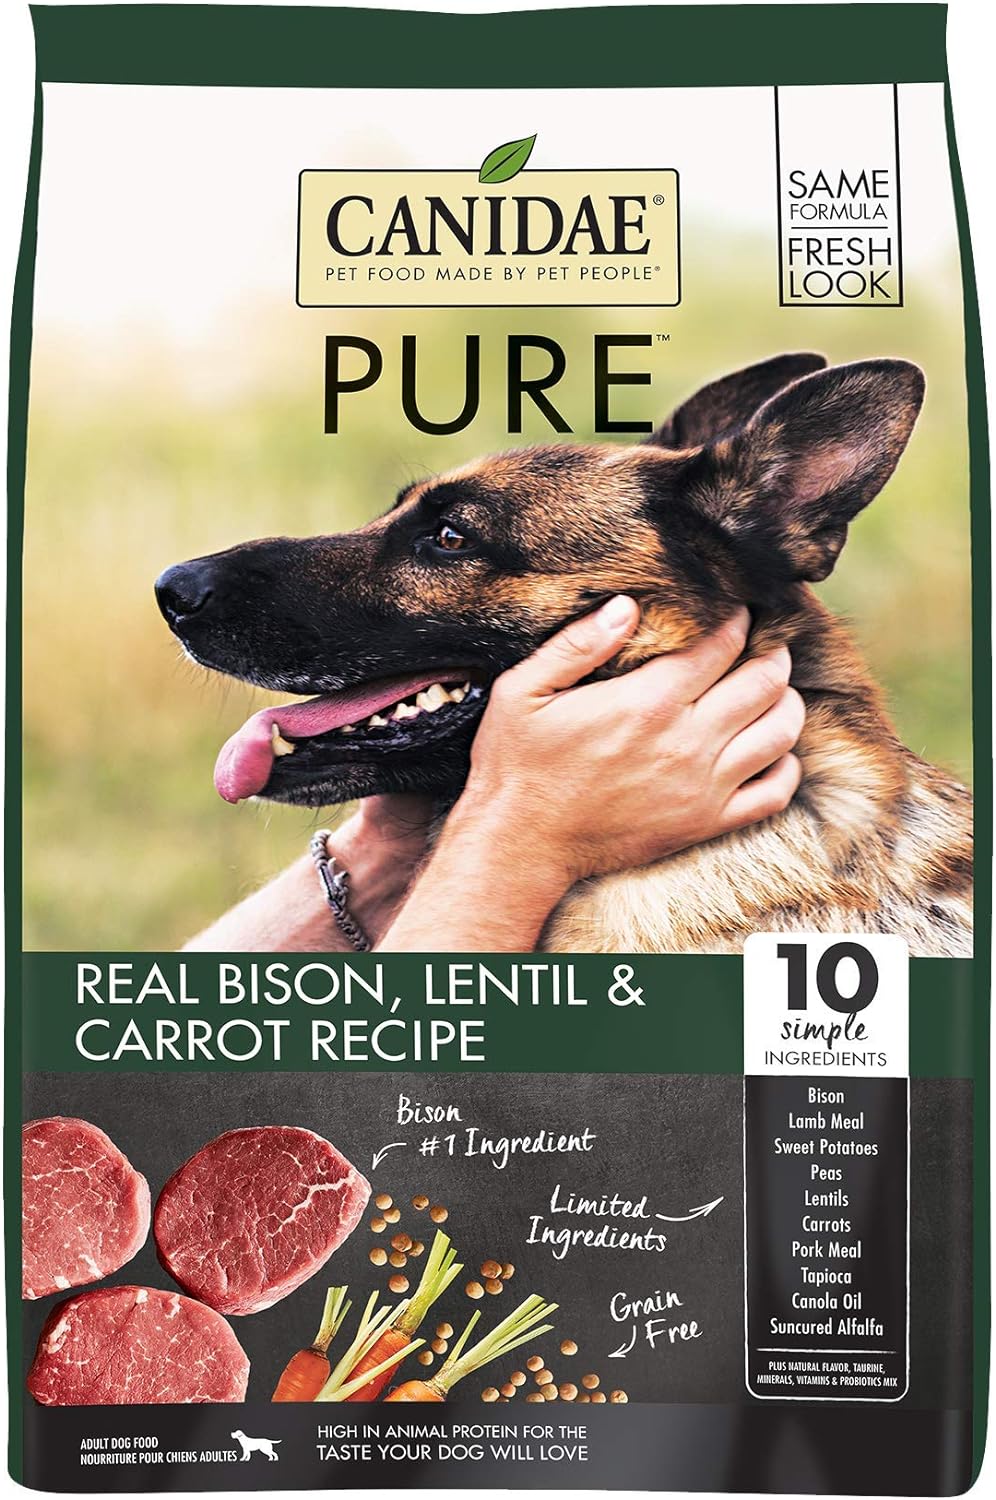 Canidae Pure Grain-Free Real Bison, Lentil & Carrot Recipe Dry Dog Food – Gallery Image 1